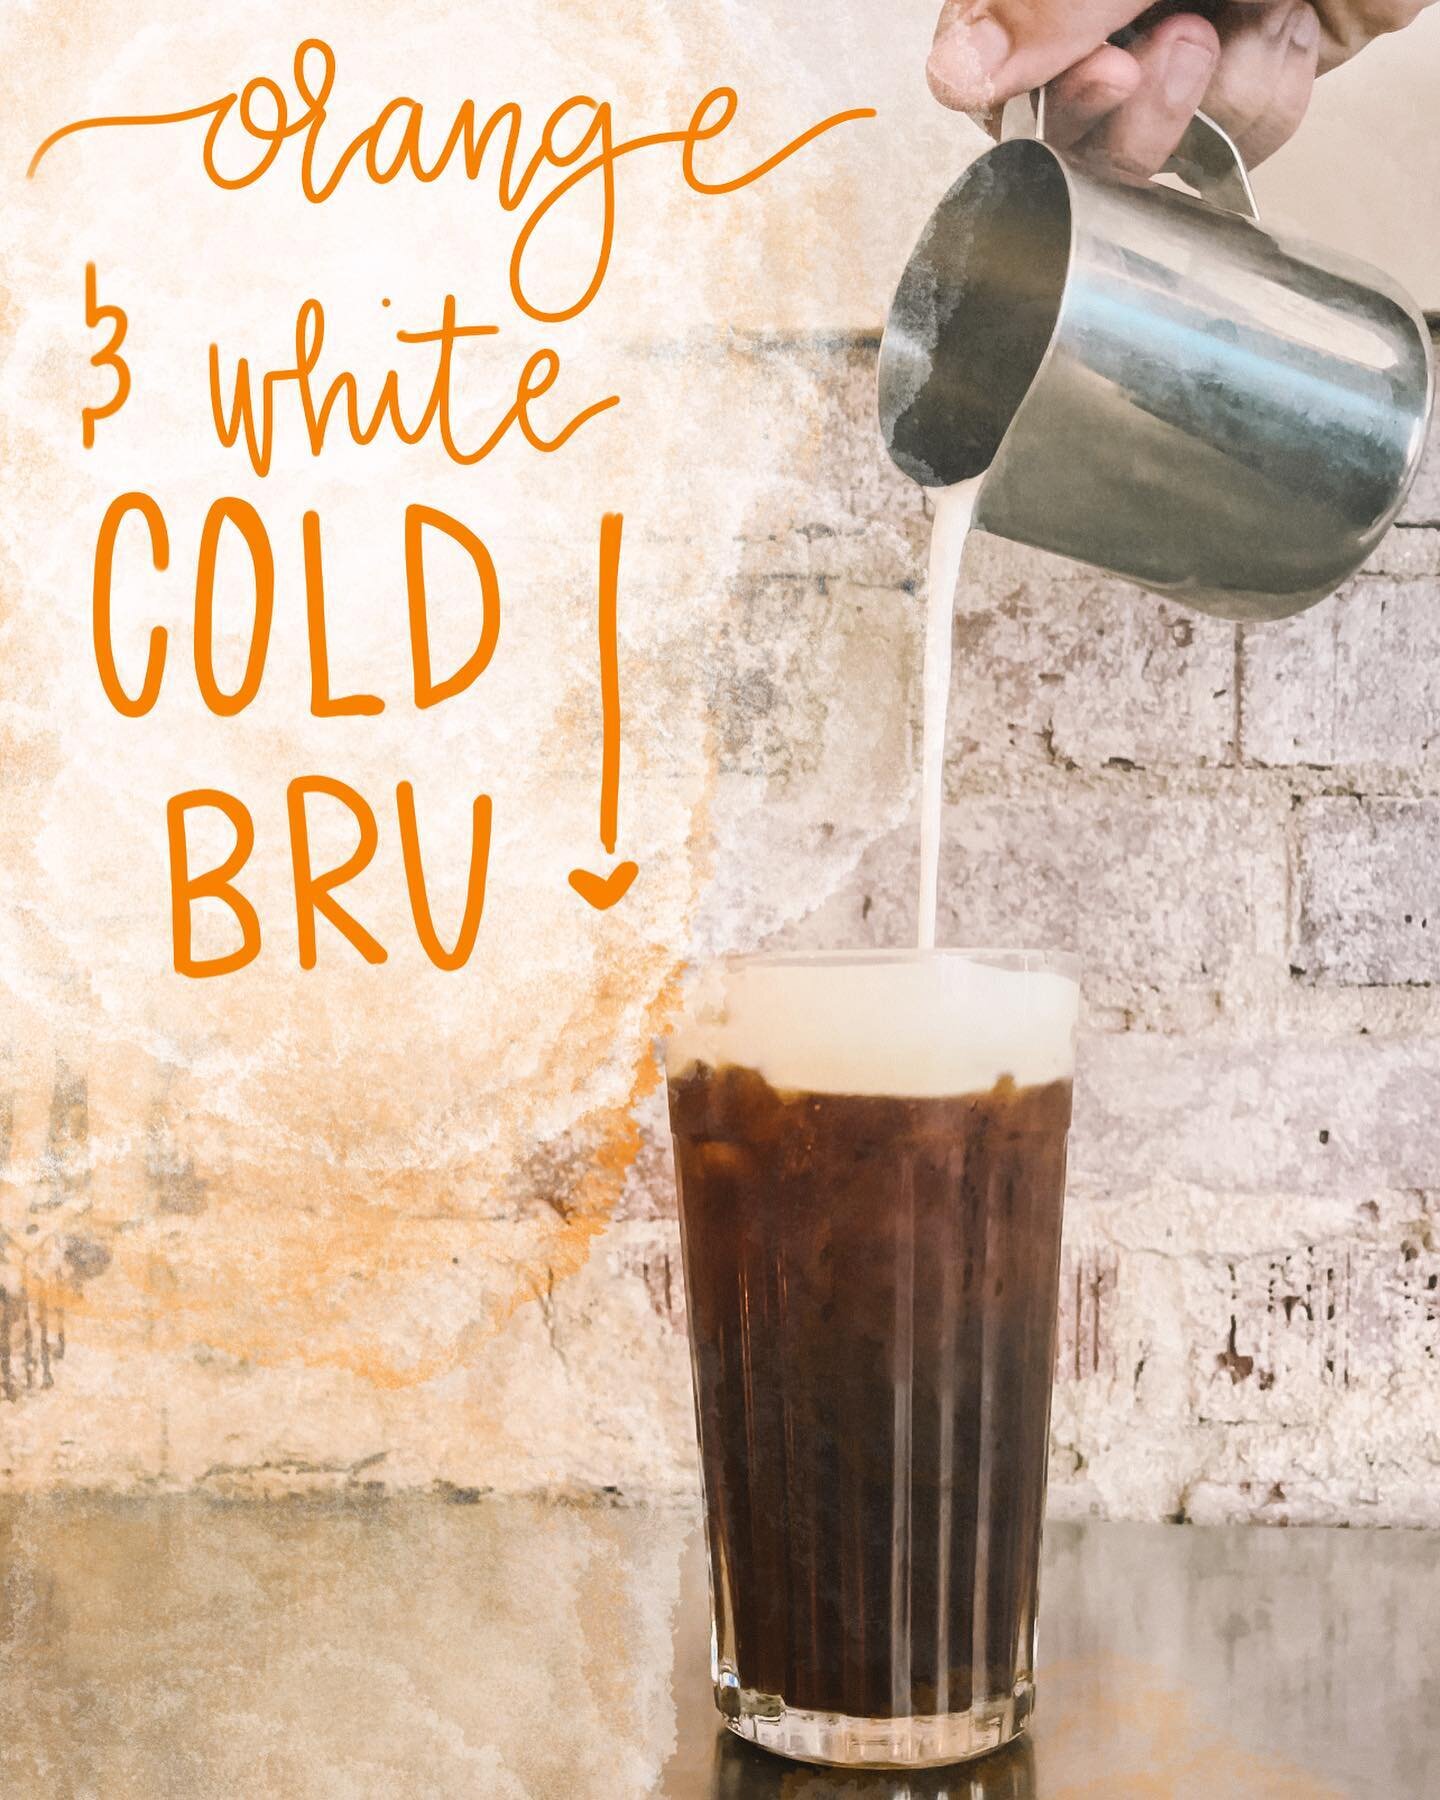 🚨SPECIAL ALERT🚨

In honor of tomorrow being the last football game in Neyland for the season we are having a GAMEDAY SPECIAL!! As we like to call it the ORANGE AND WHITE COLD BRU!!!! 

#orangeandwhite #tennesseefootball #utkfootball #likewisecoffee